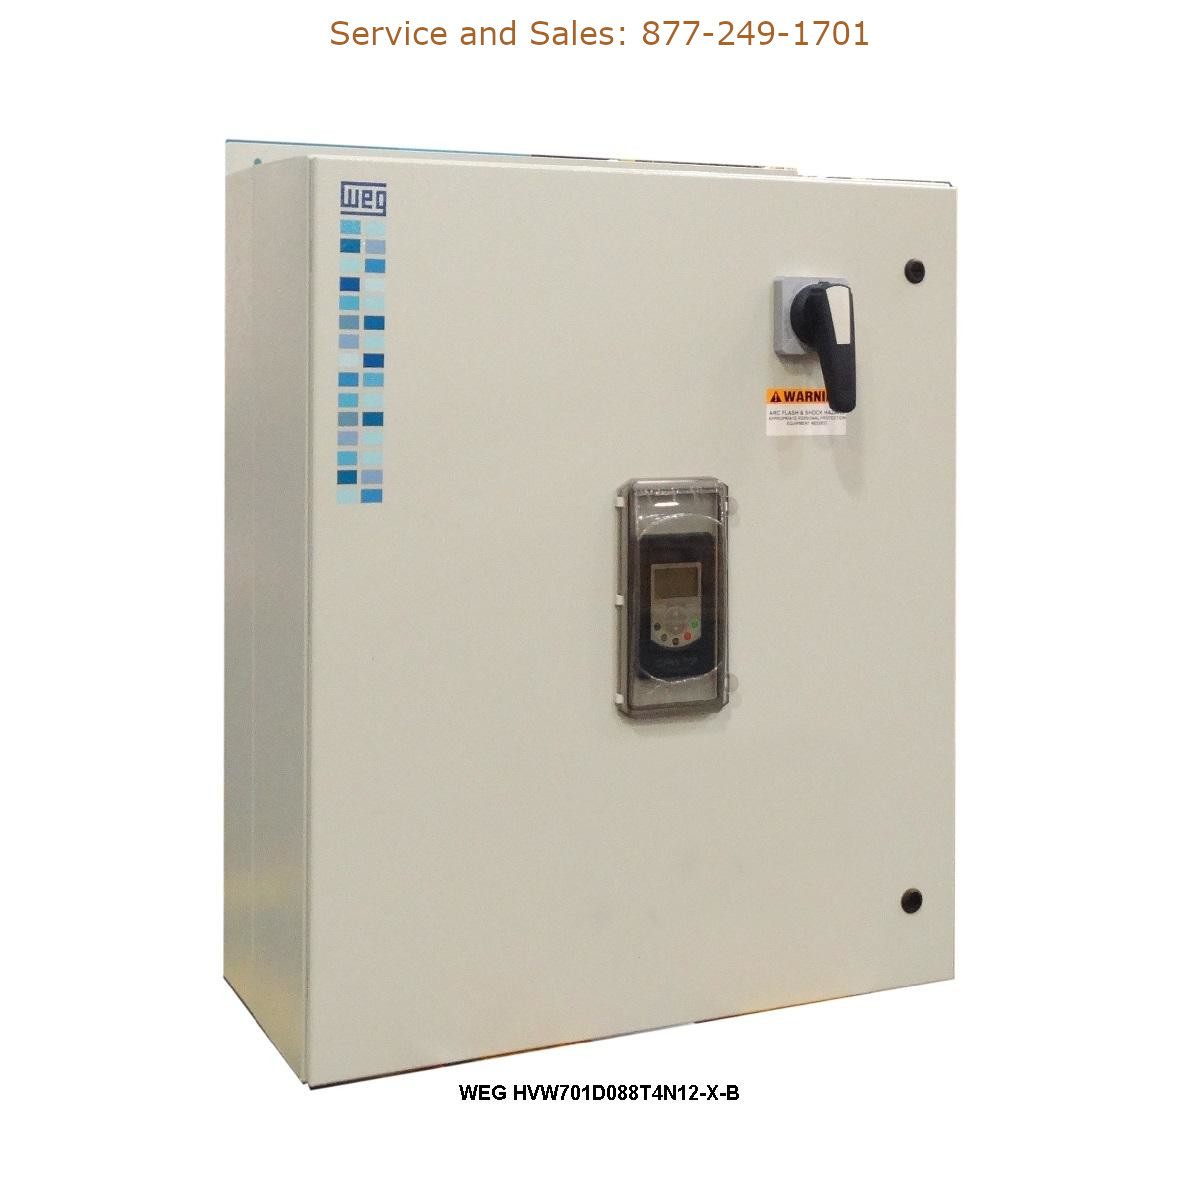 WEG HVW701D088T4N12-X-B WEG Model Number HVW701D088T4N12-X-B WEG Drives, Variable Speed Drives Repair Service, Troubleshooting, Replacement Parts https://gesrepair.com/wp-content/uploads/2022/WEG/WEG_HVW701D088T4N12-X-B_Drives_Variable_Speed_Drives.jpg